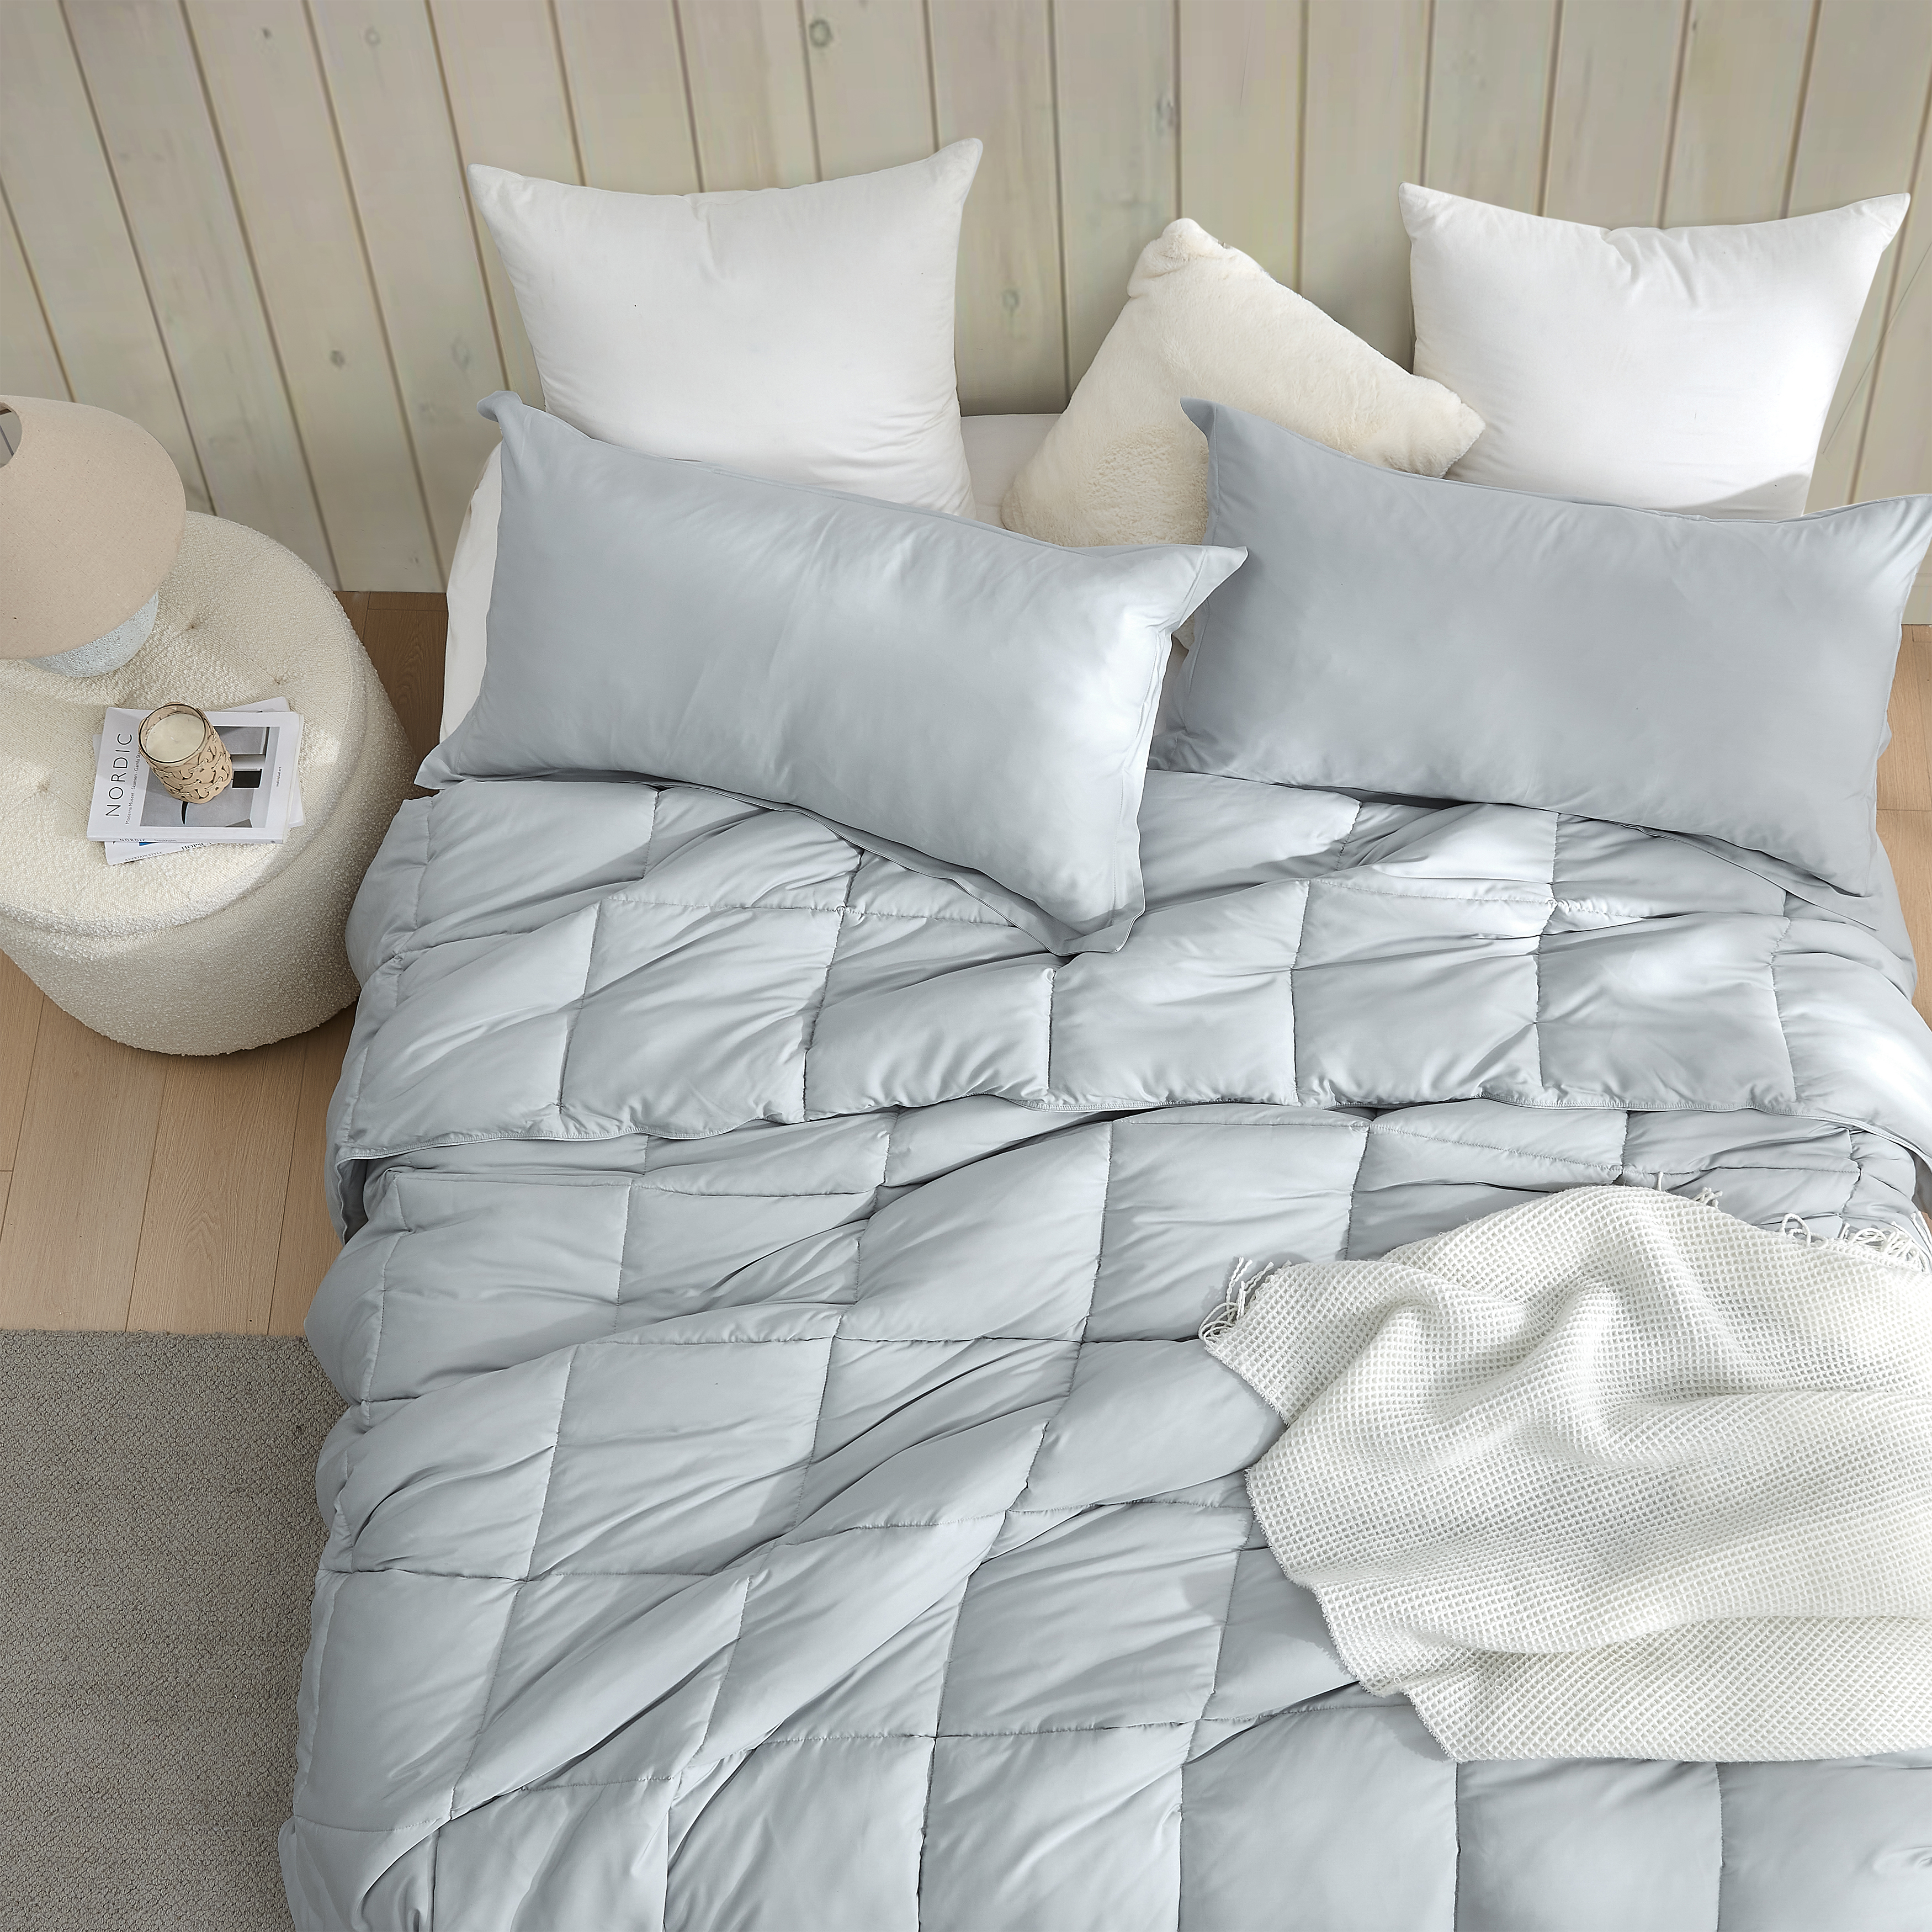 https://comainducer.com/product_images/k/414/Snorze_cloud_comforter_ultra_cozy_bamboo_oversized_king_glacier_gray1_1_2__66748.jpg